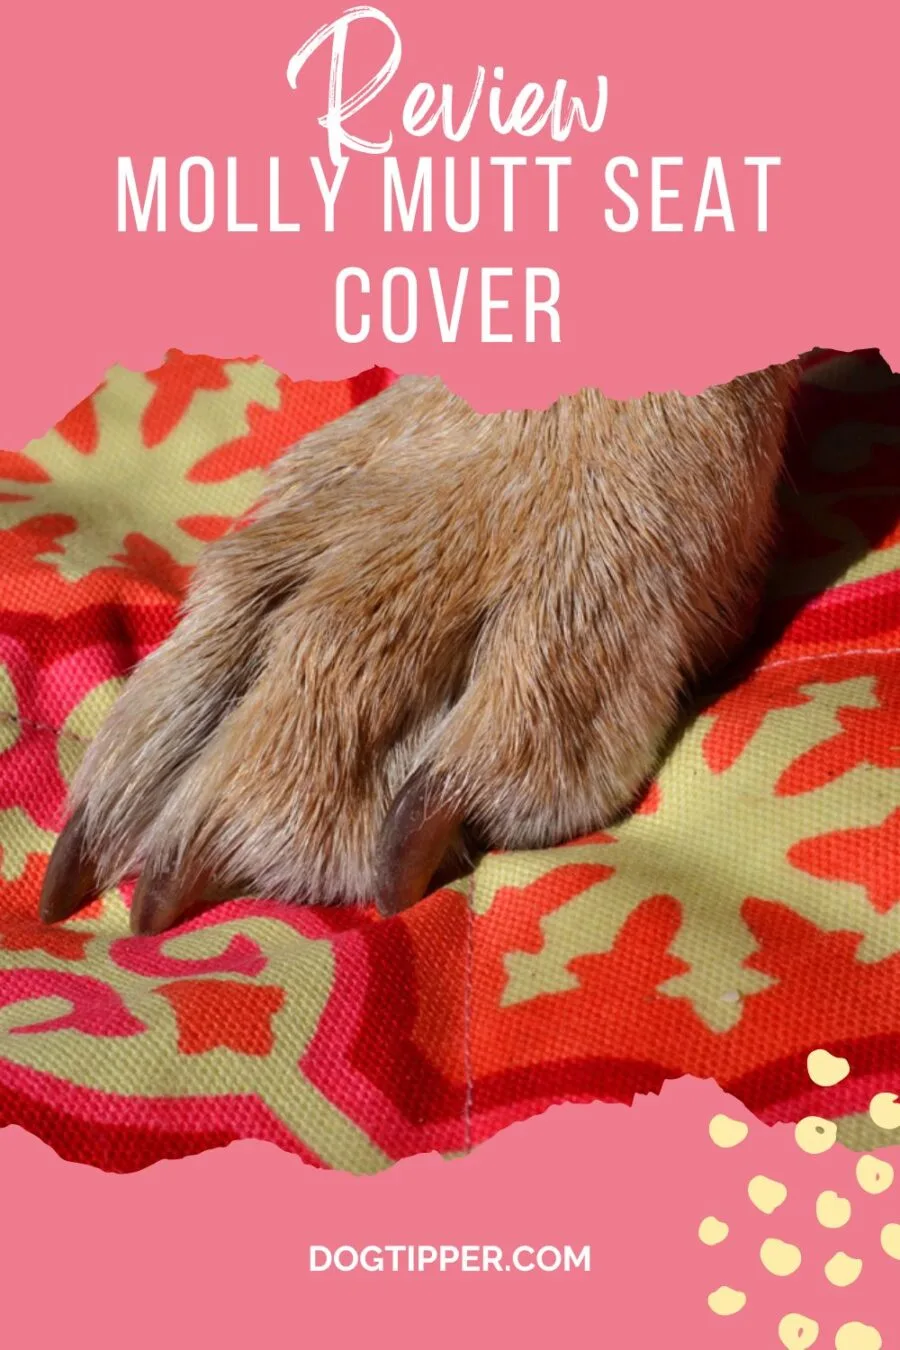 Review: Molly Mutt Seat cover 